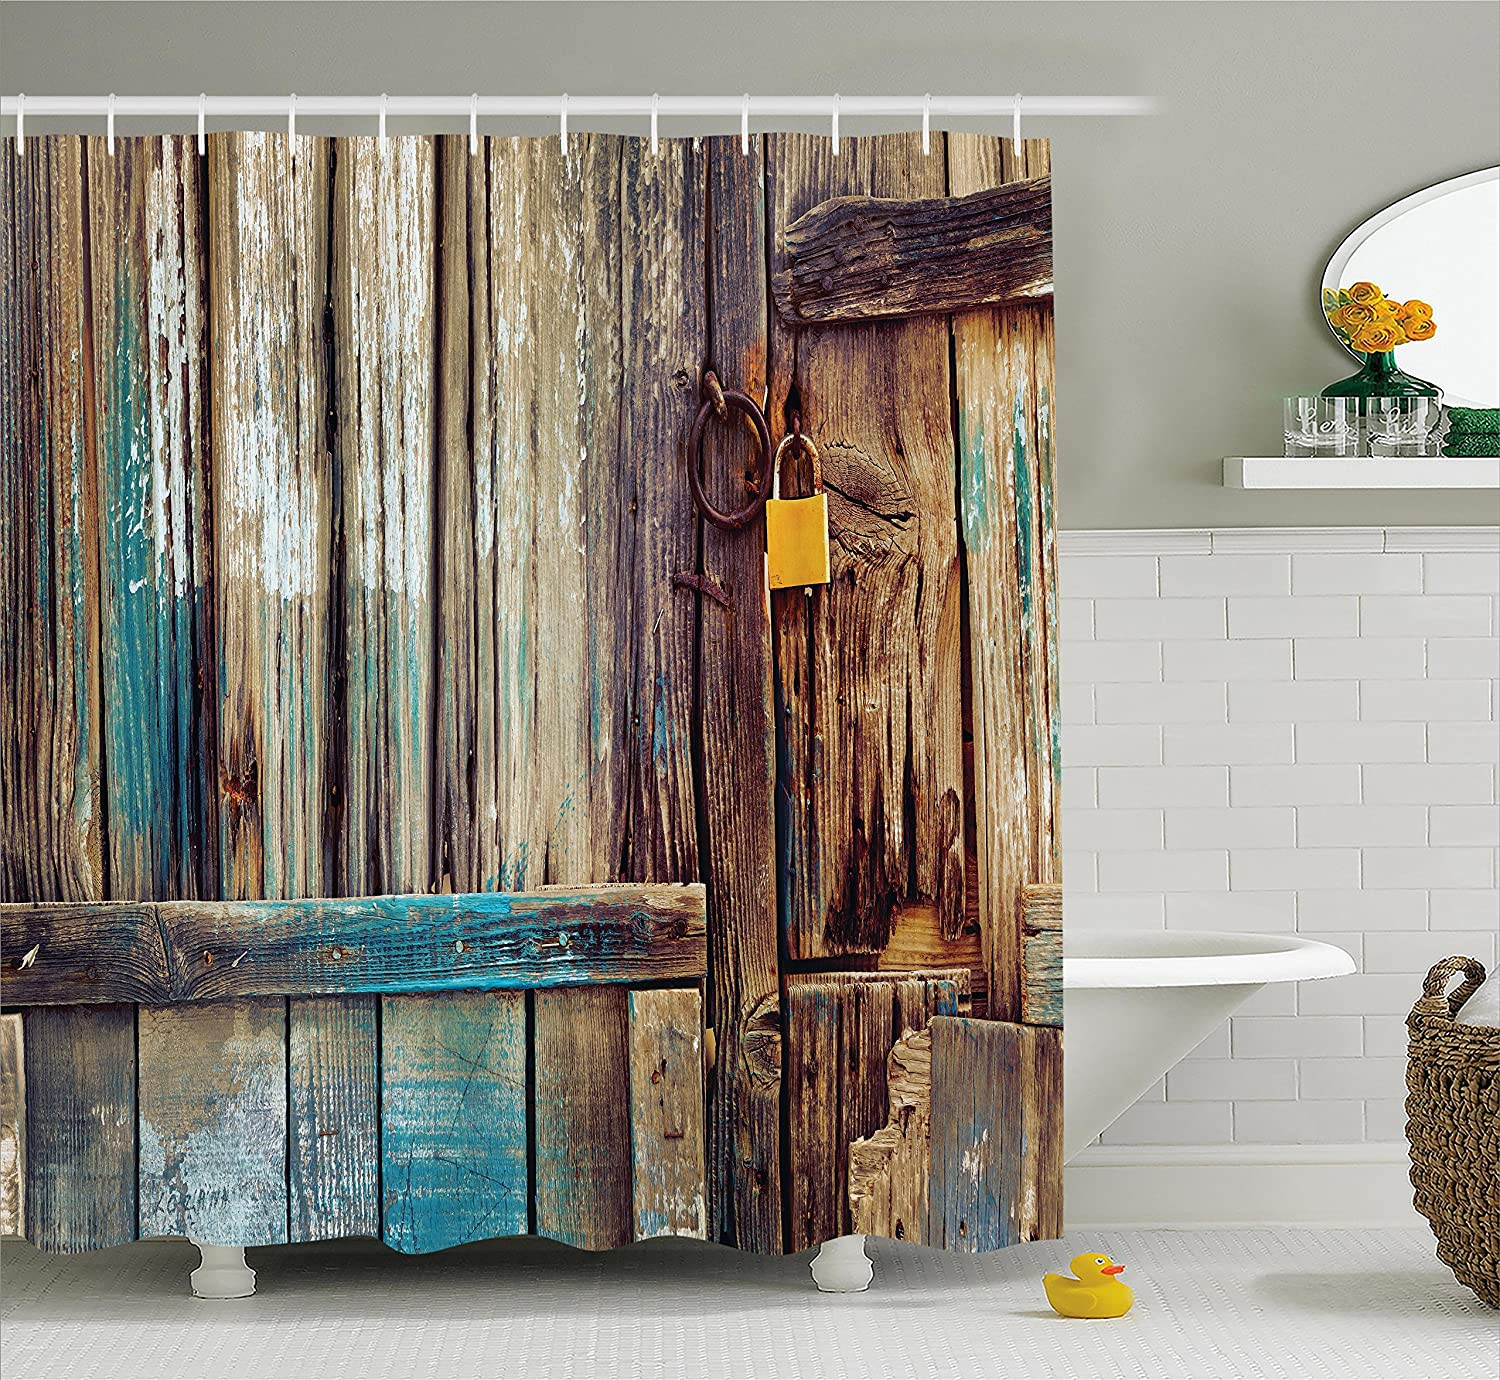 Rustic Bathroom Shower Curtain
 Rustic Shower Curtain Aged Shed Door Backdrop Bath Country